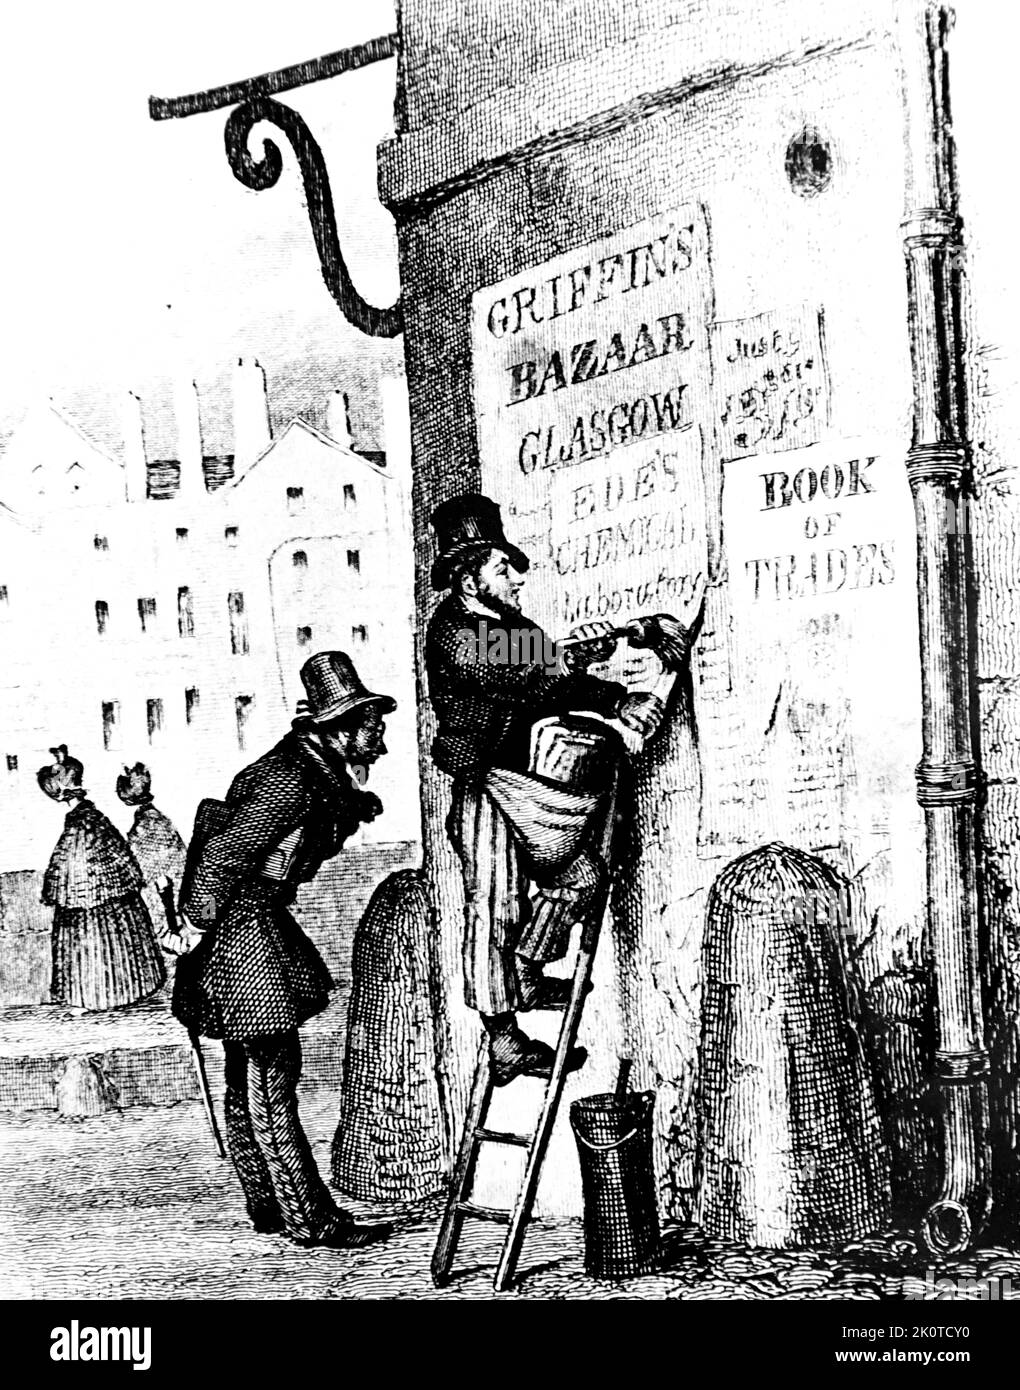 19th century Illustration of a Glasgow, Bill Poster pasting a poster advert (billboard) in Scotland Stock Photo